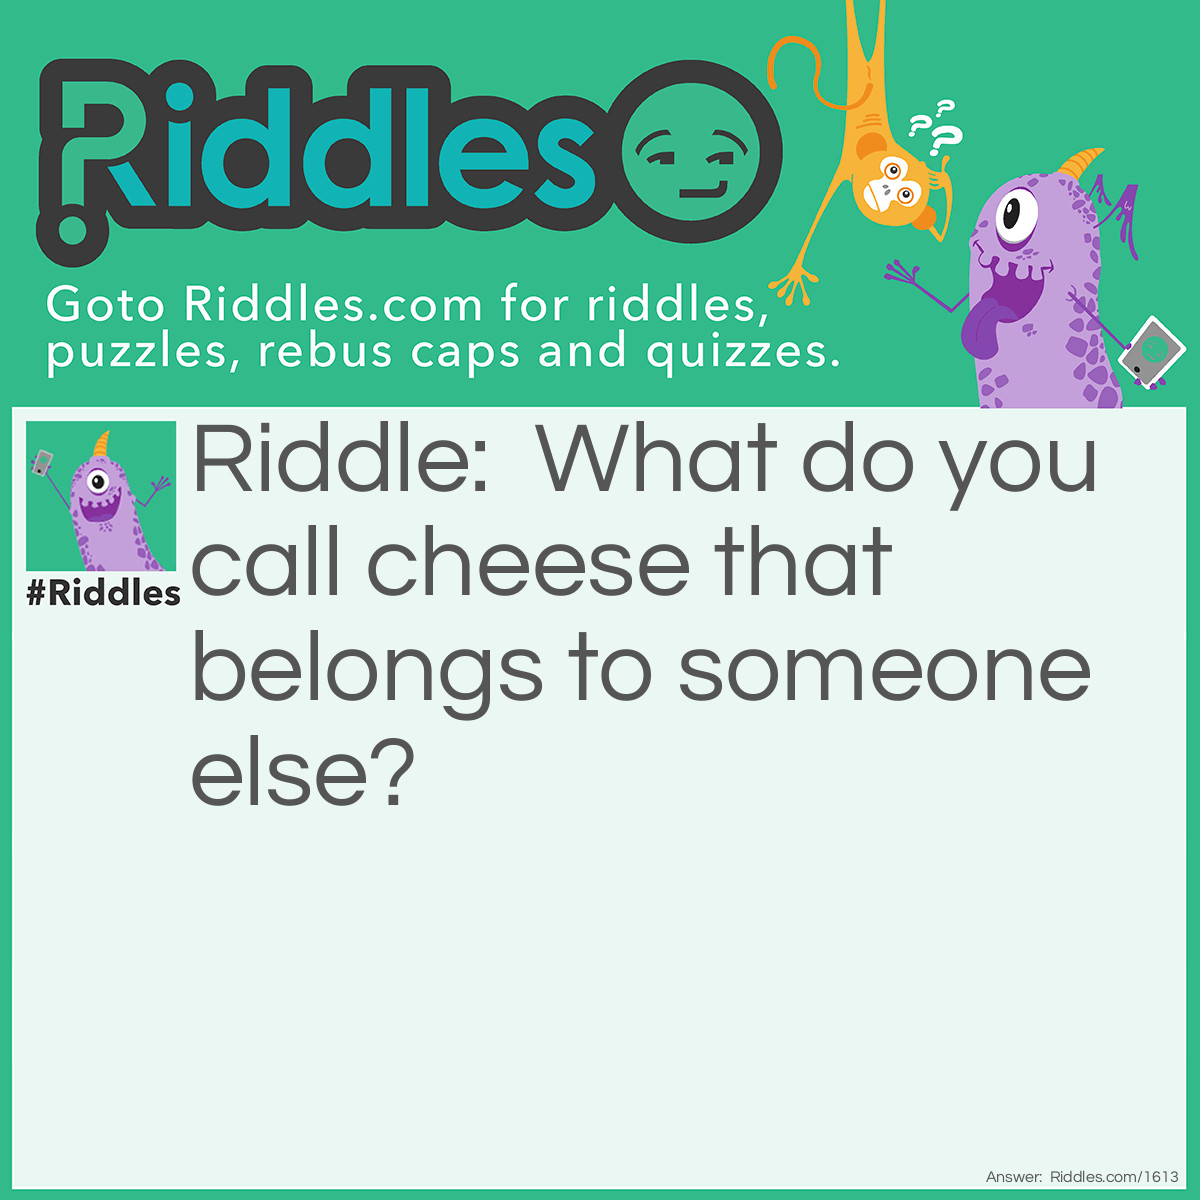 Riddle: What do you call cheese that belongs to someone else? Answer: Nacho cheese!